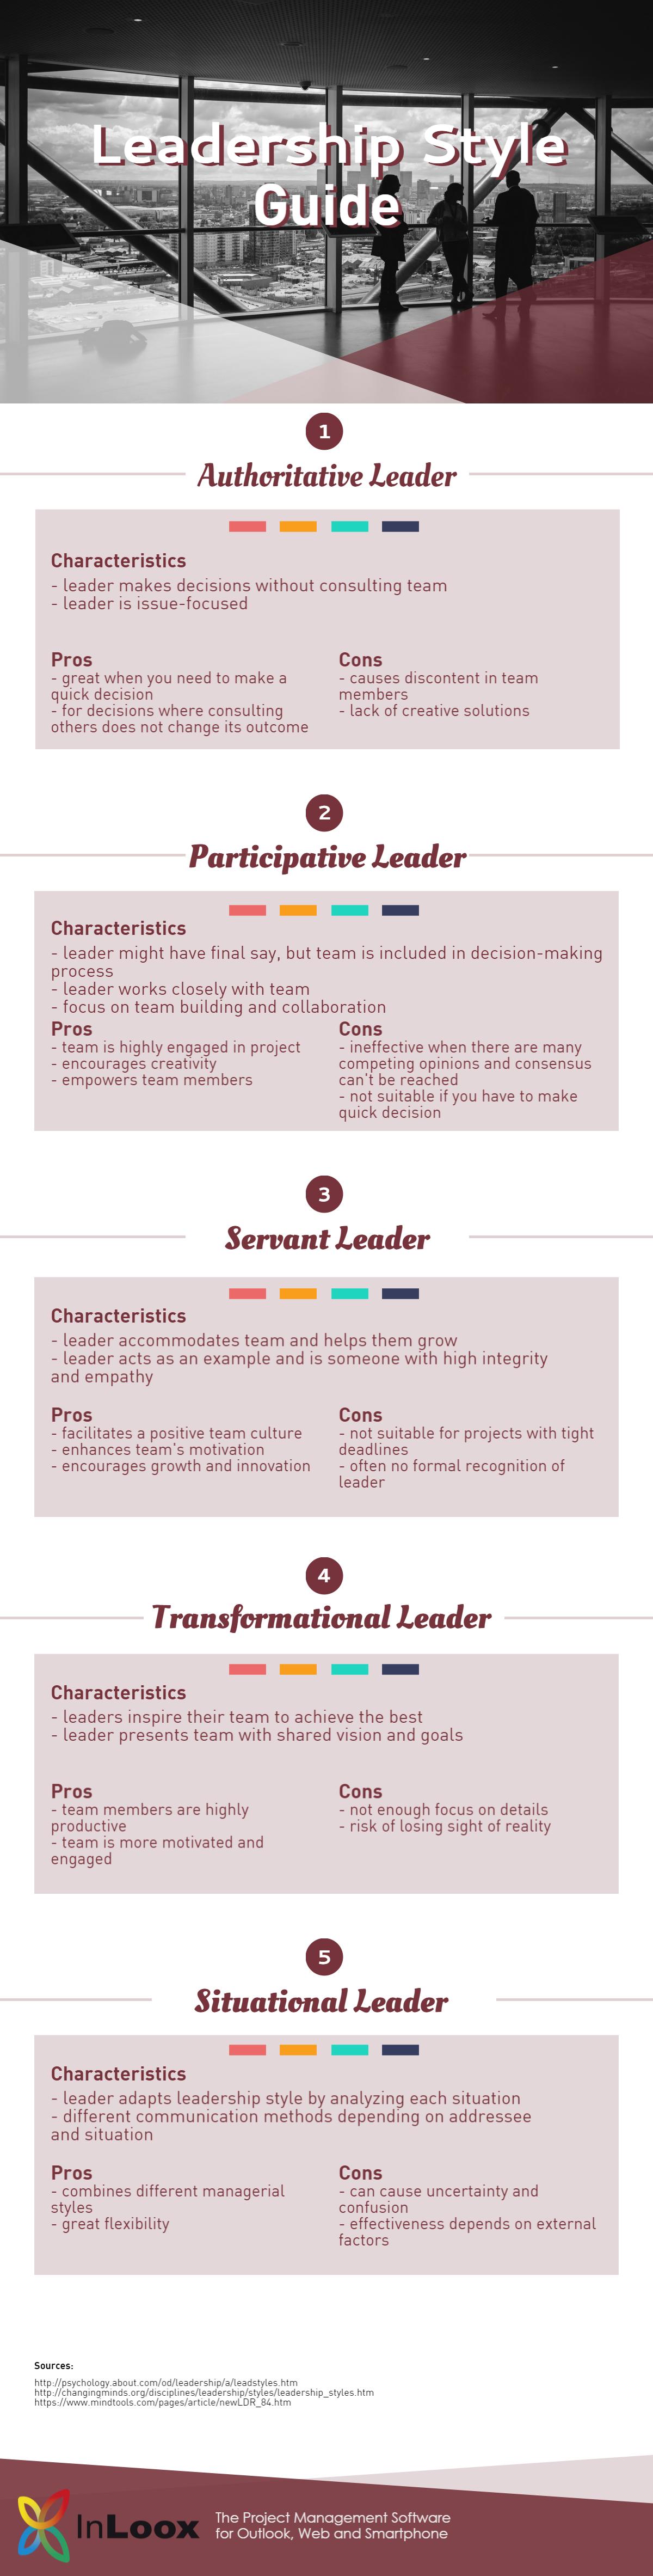 Leadership Style Guide